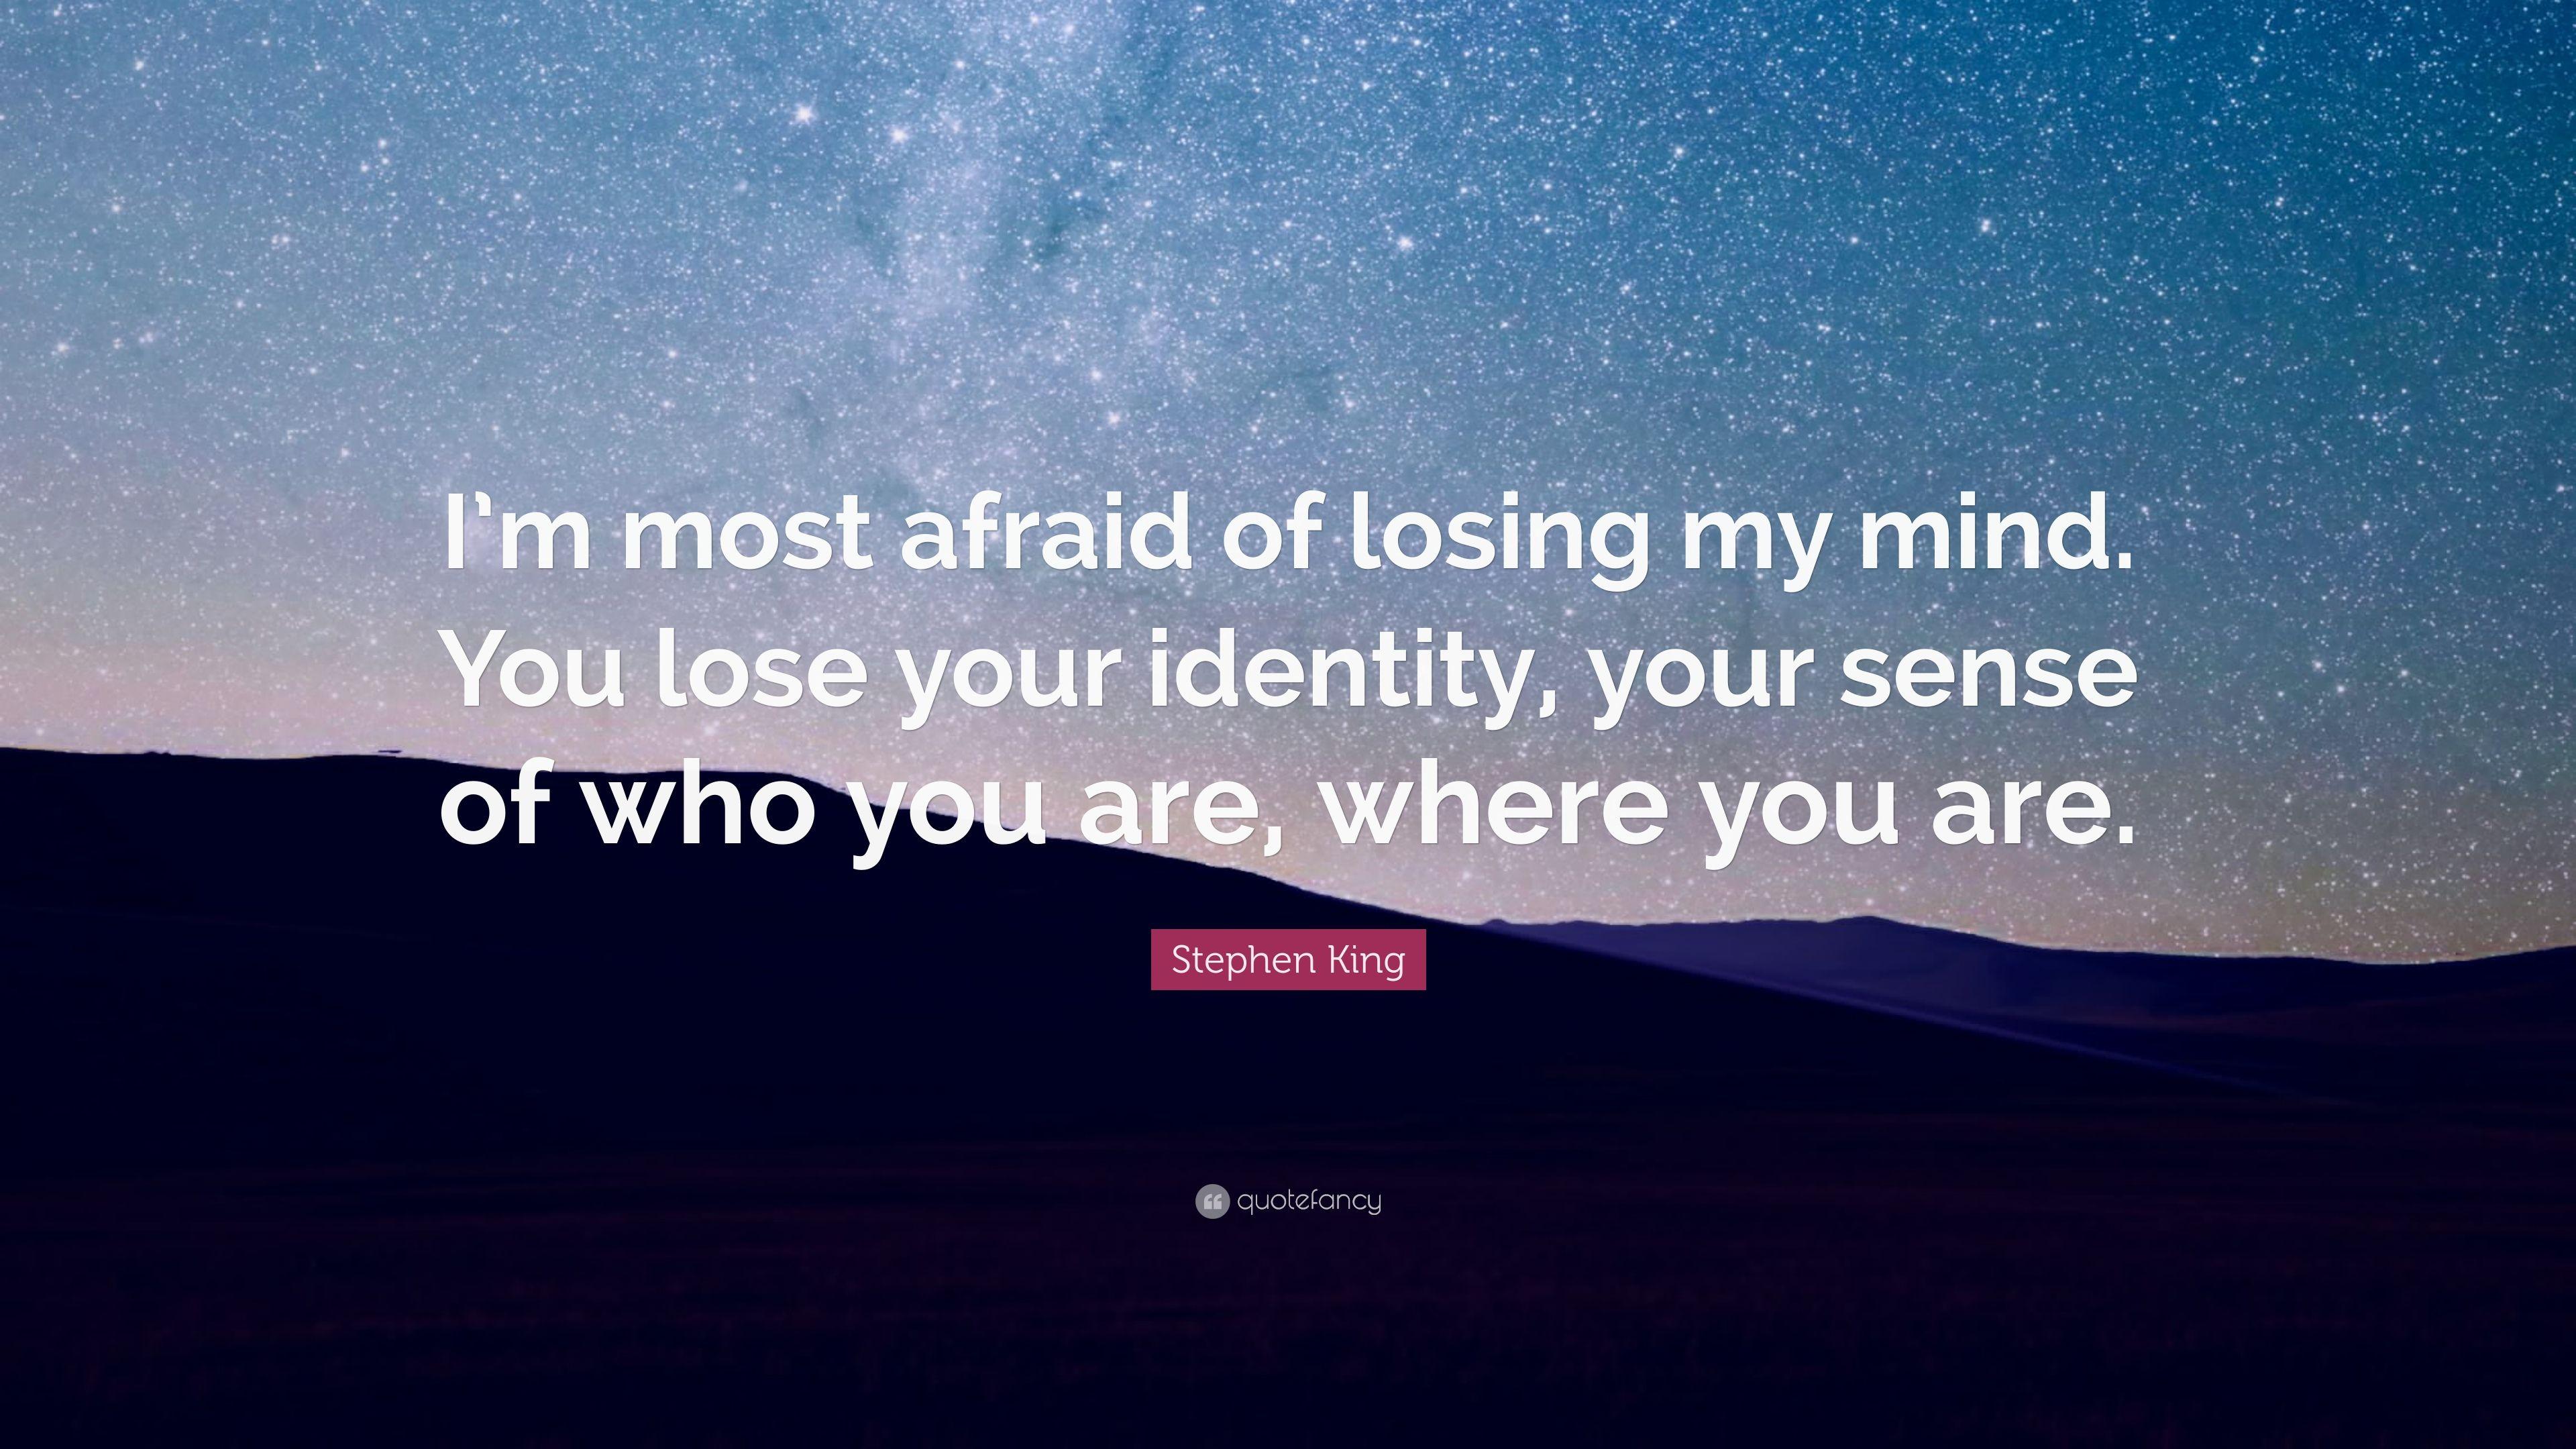 Stephen King Quote: “I'm most afraid of losing my mind. You lose